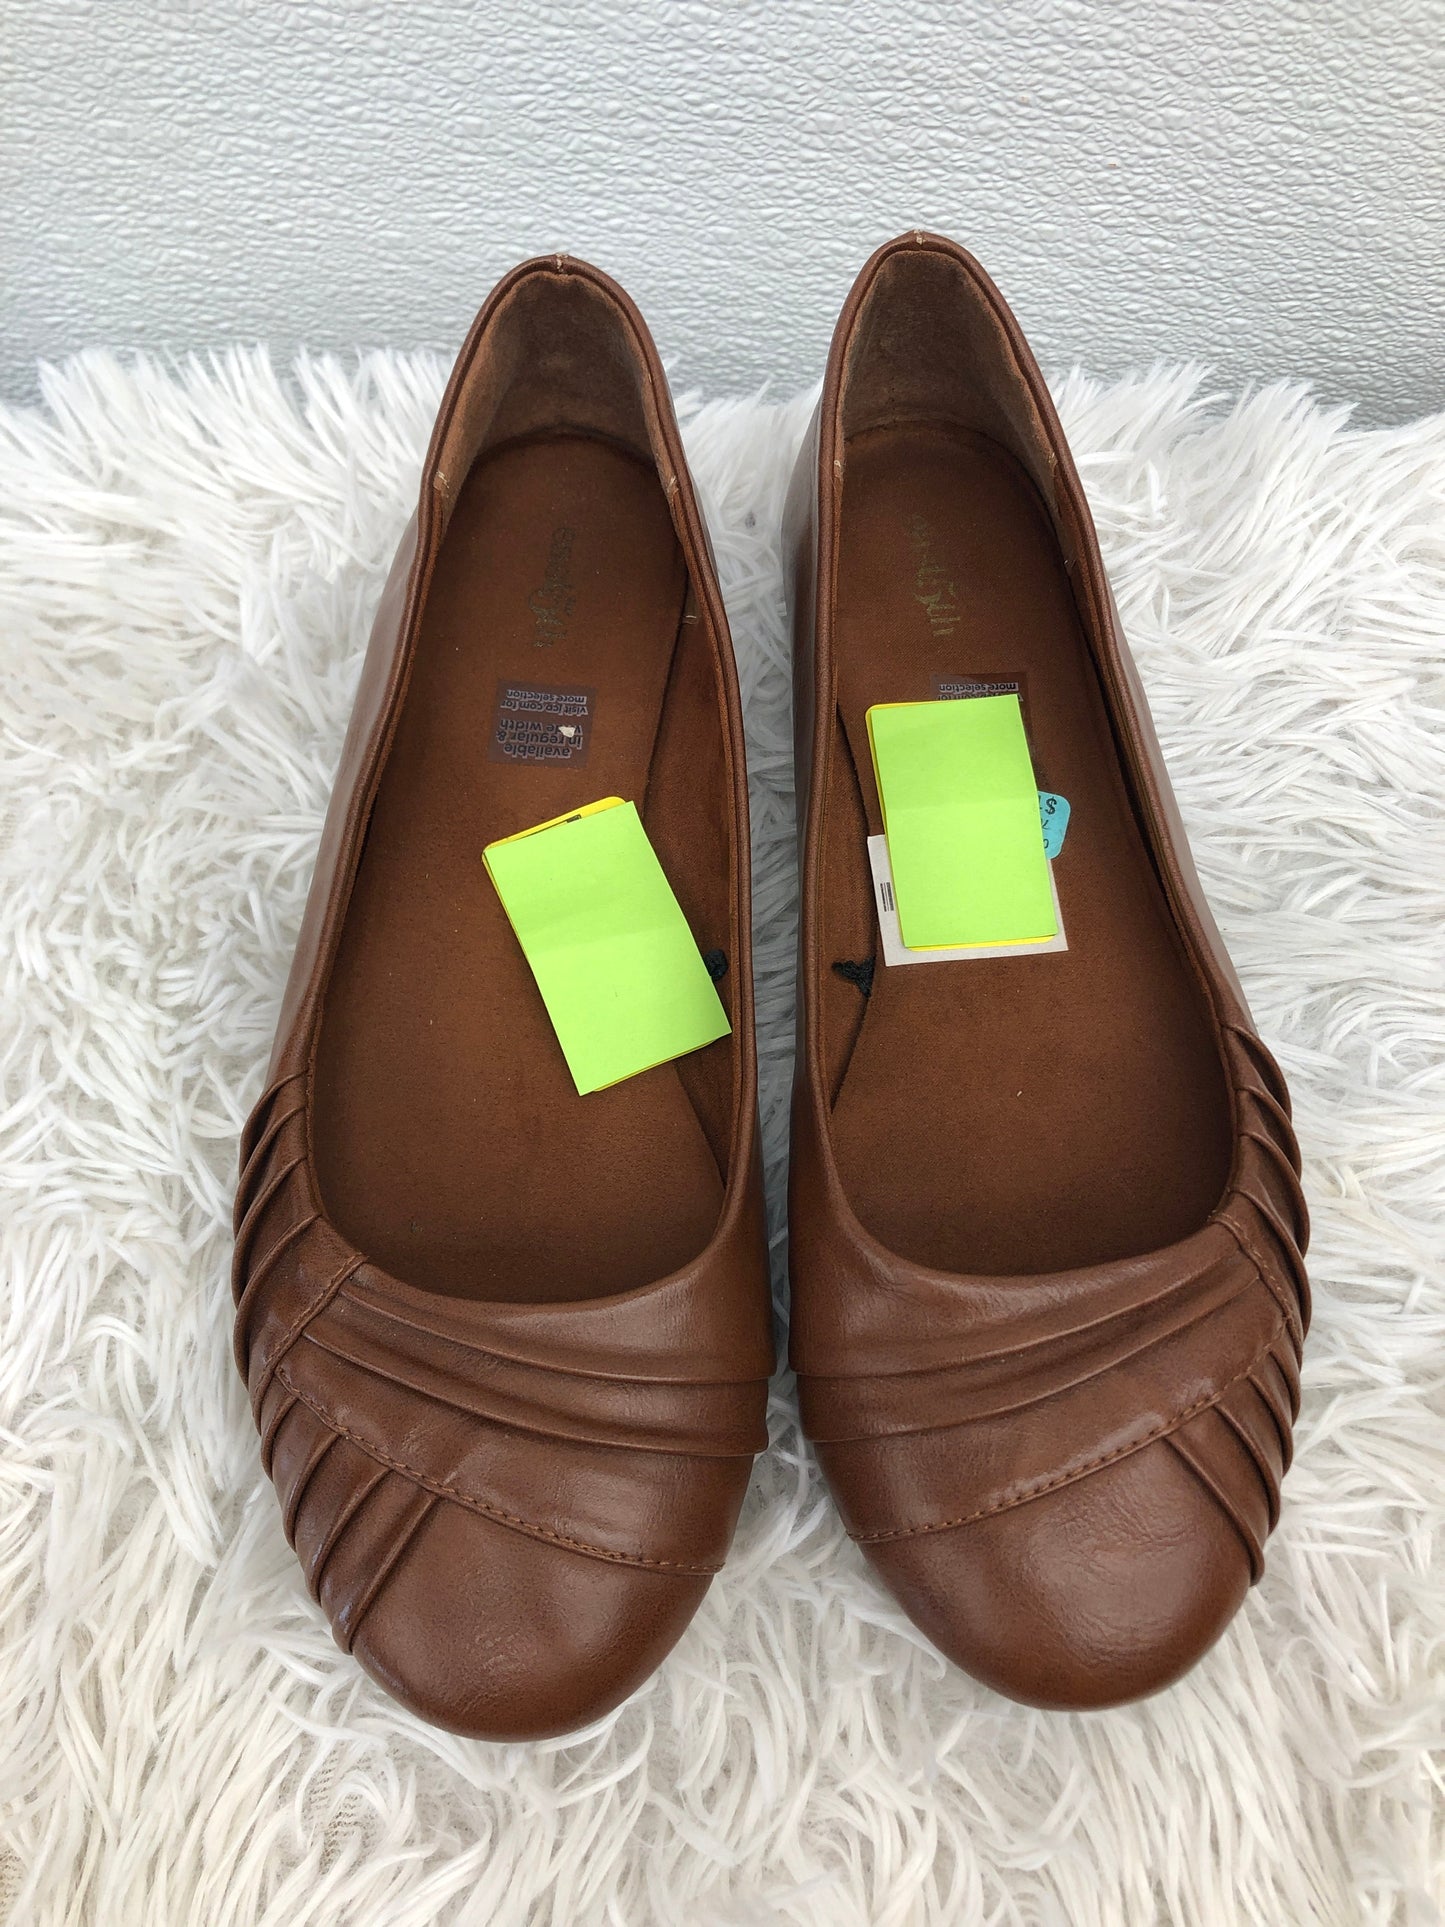 Shoes Flats Ballet By East 5th  Size: 8.5